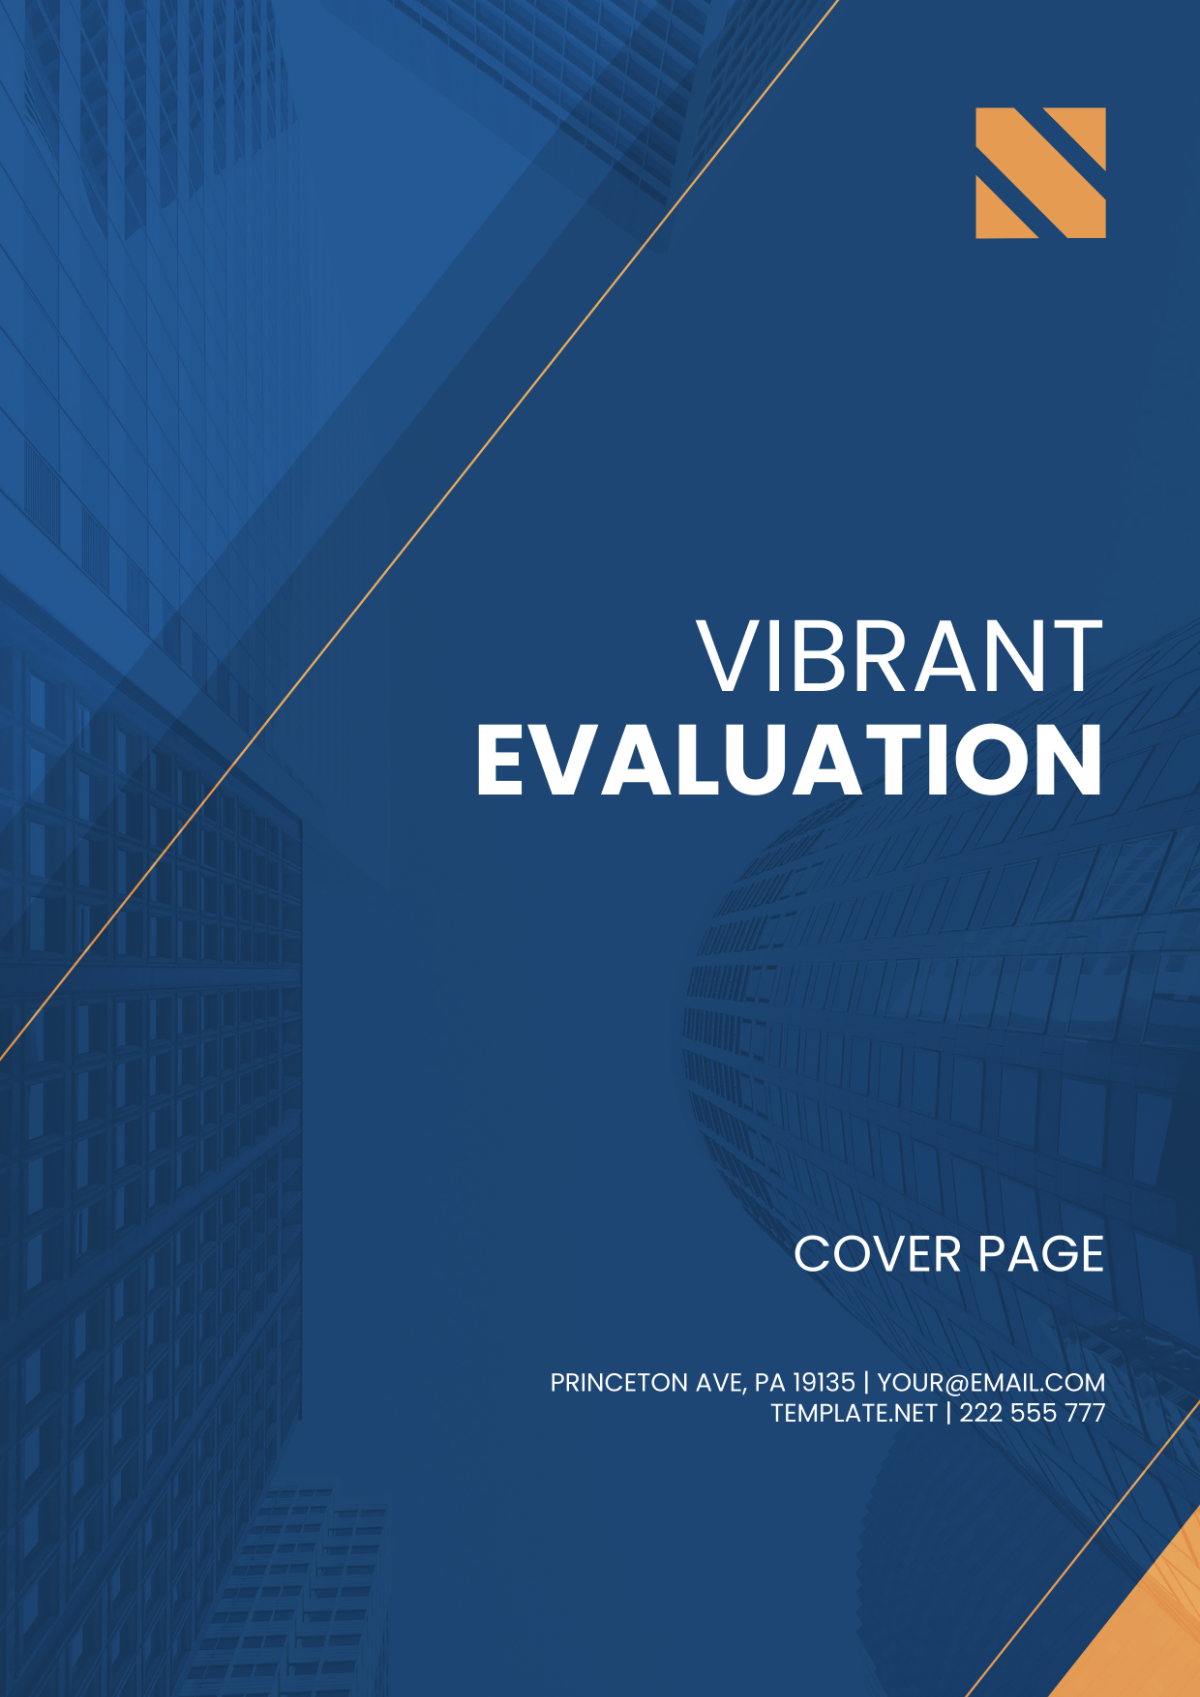 Vibrant Evaluation  Cover Page Template